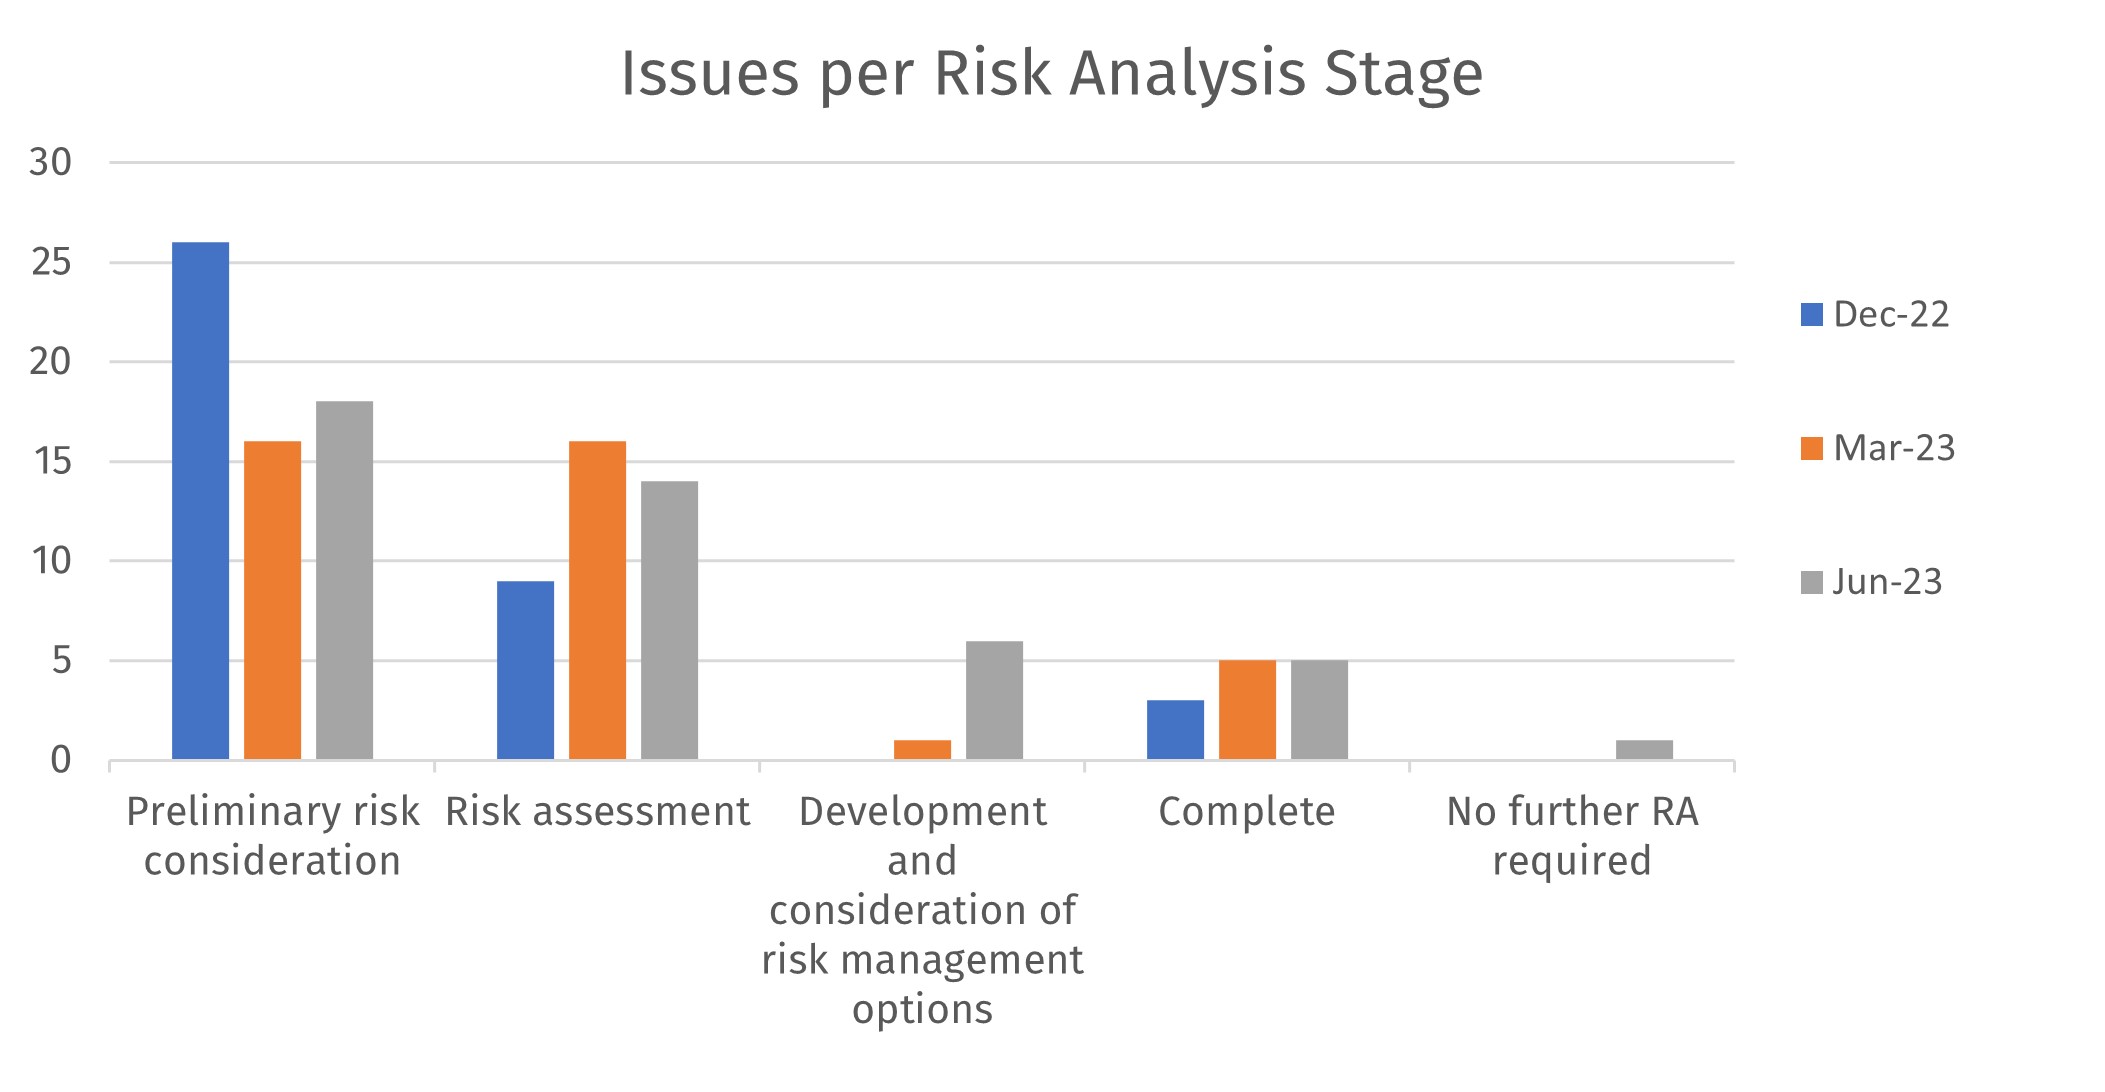 Preliminary risk consideration seen an increase since March 2023, development and consideration of risk management options highest since December 2022. 